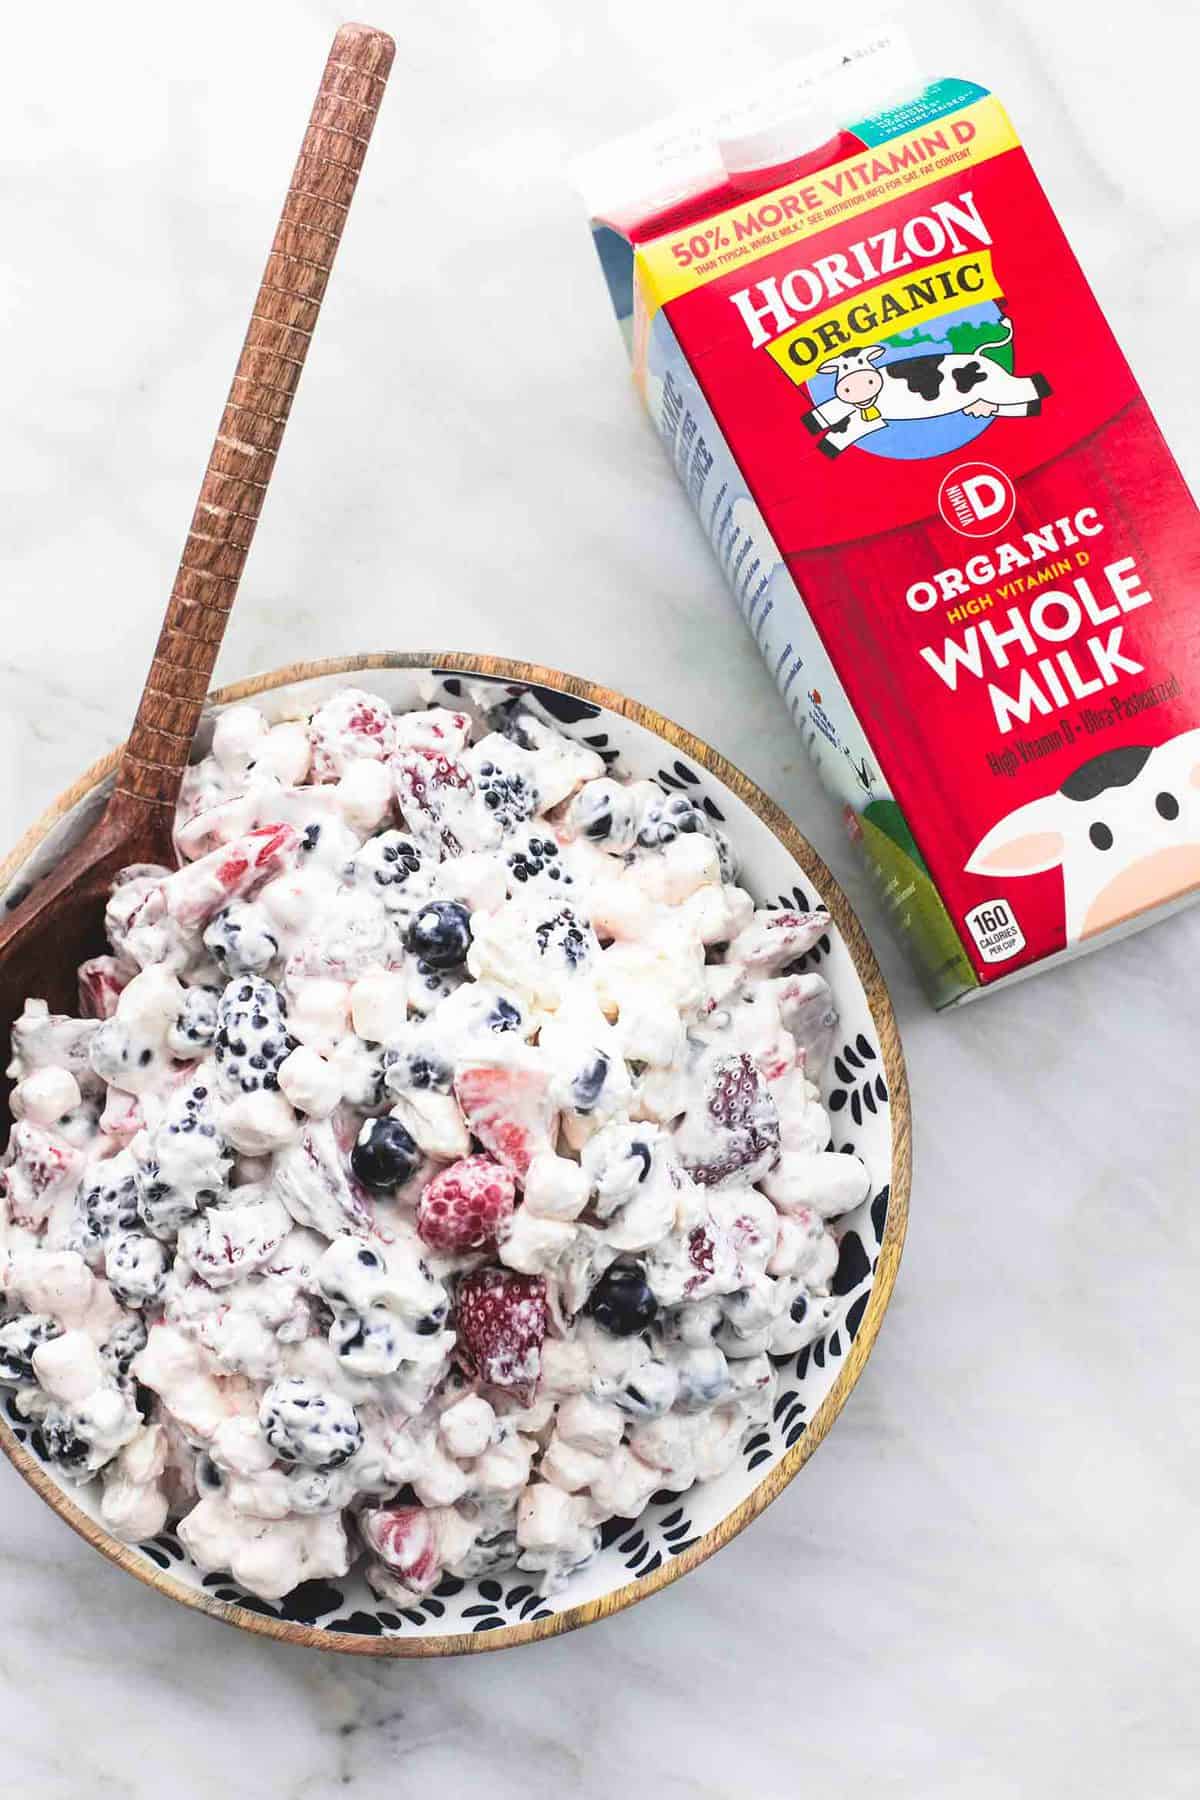 top view of berry cheesecake salad with a wooden serving spoon in a bowl with a carton of Horizon Organic whole milk on the side.